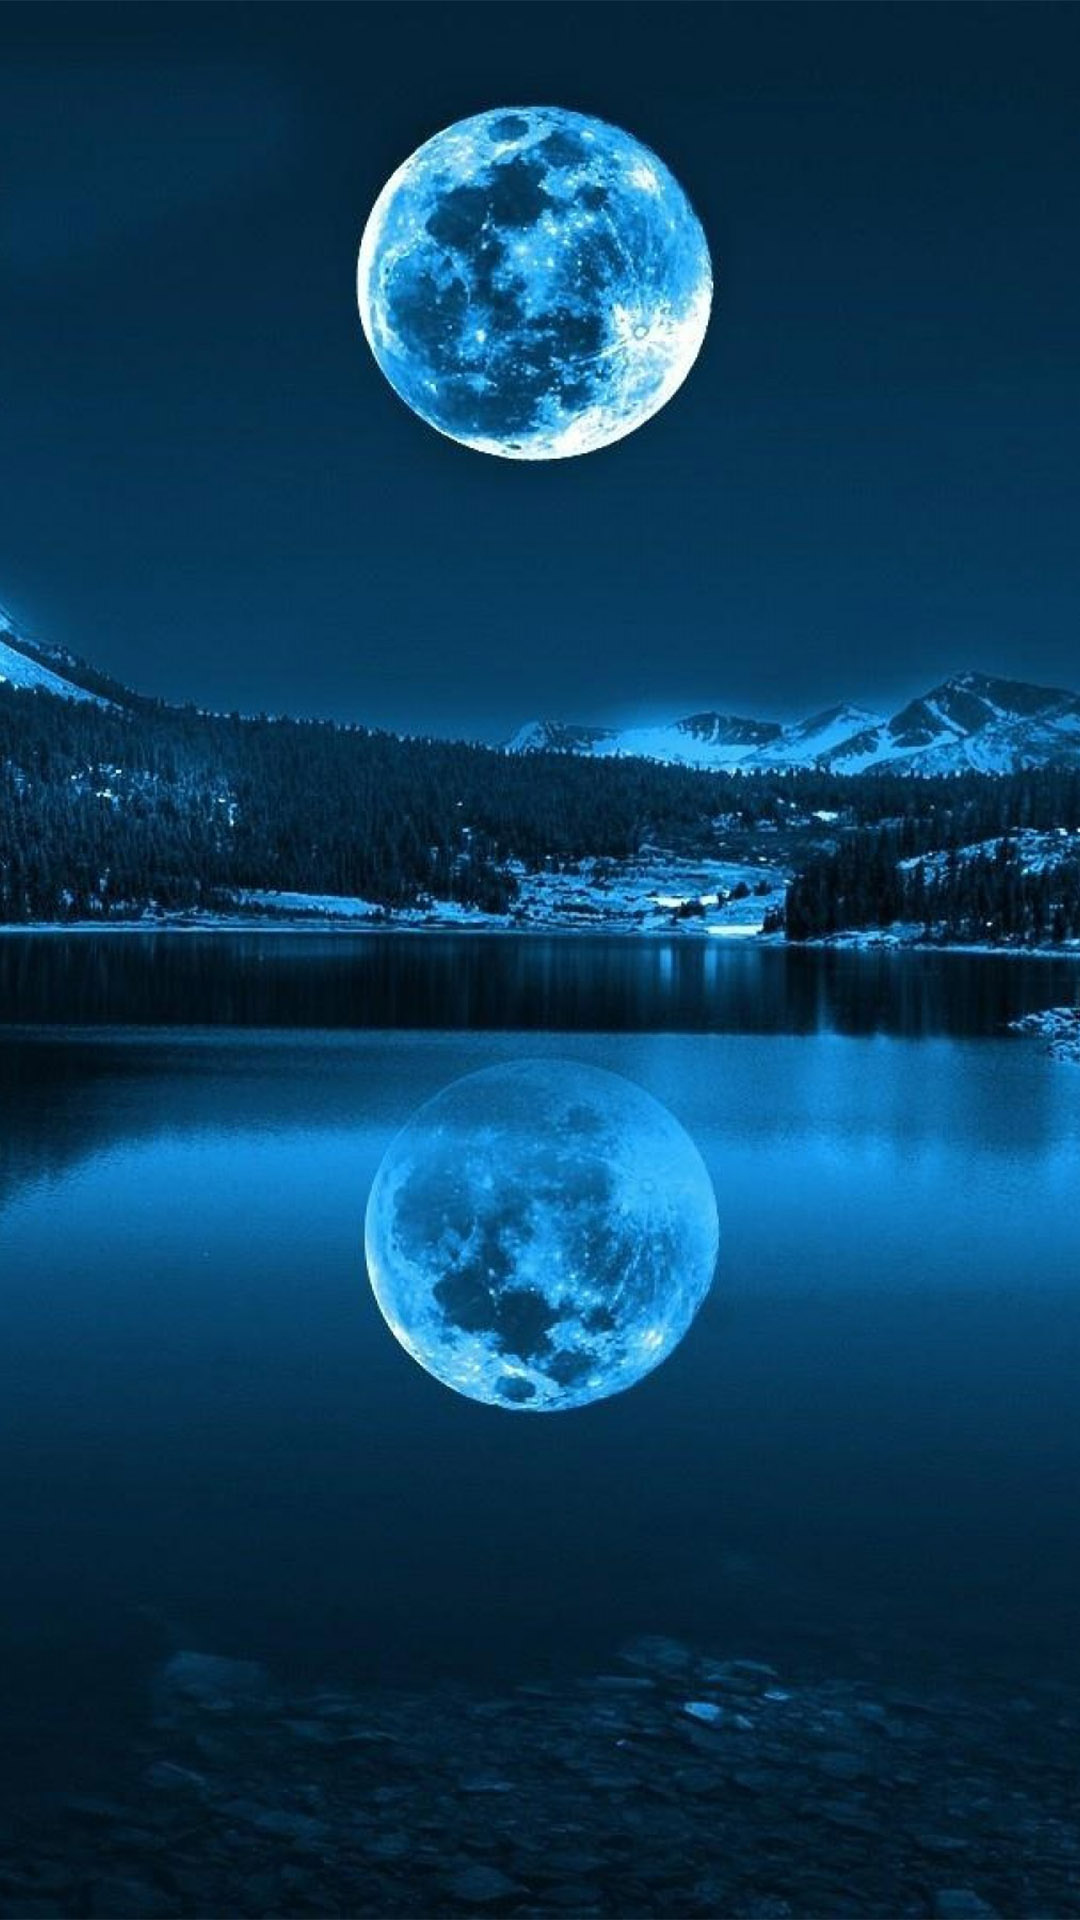 Giant Moon Rise Smartphone Wallpapers HD ⋆ GetPhotos